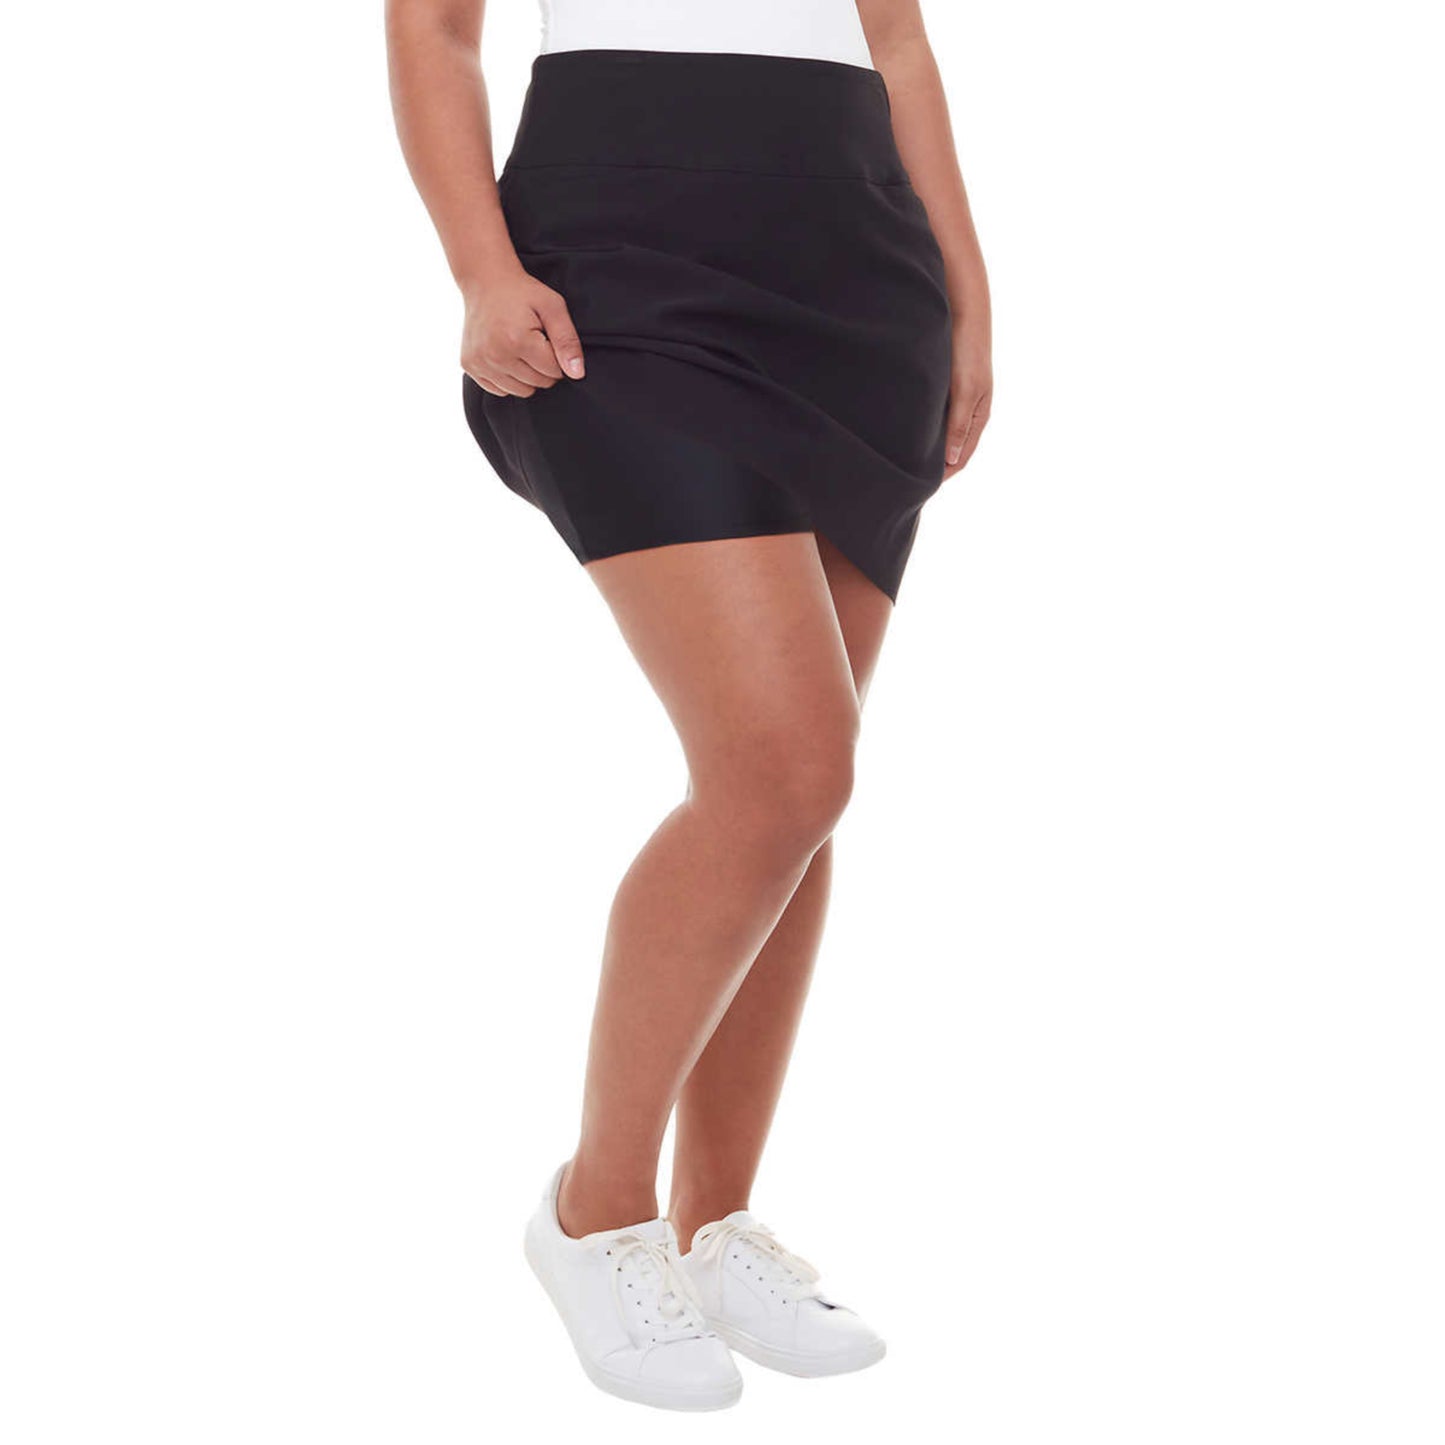 S.C. & CO Women's Tummy Control Built-in Shorts Pockets Stretch Active Casual Skort